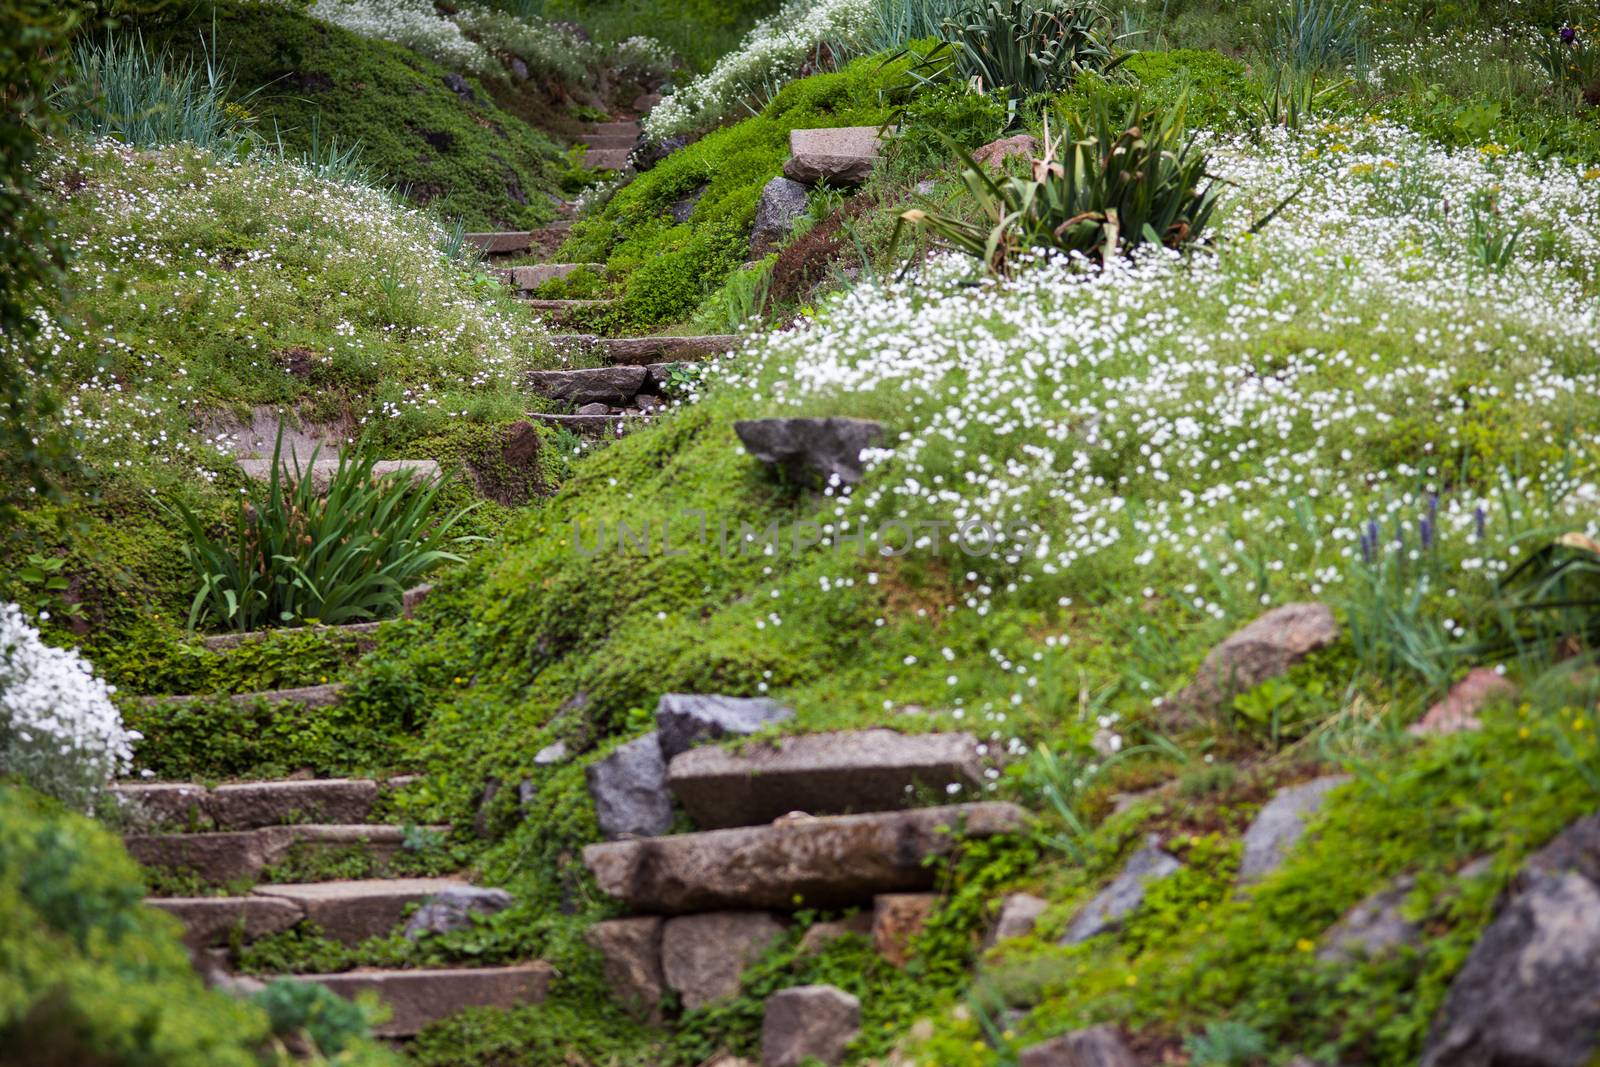 Stony stairs in the green garden by rootstocks